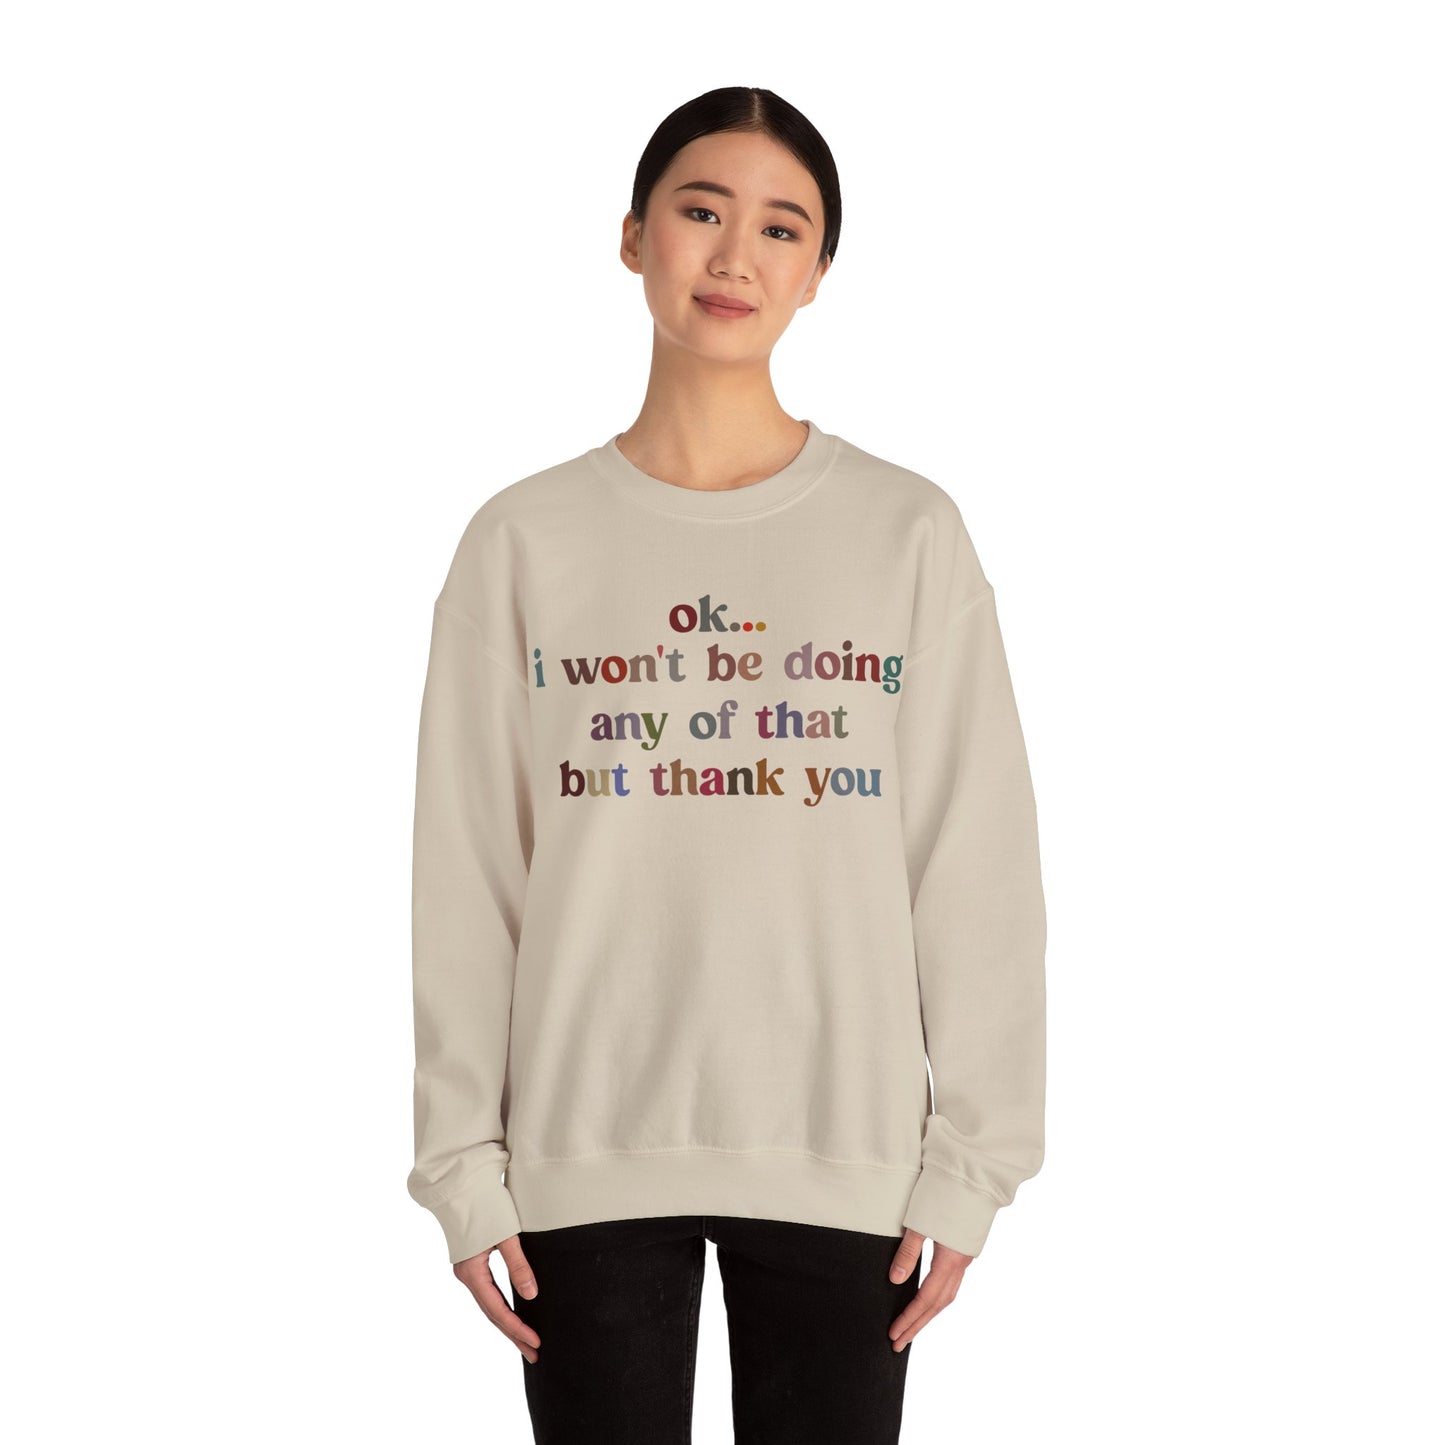 Ok I Won't Be Doing Any Of That But Thank You Sweatshirt, Funny Sweatshirt, Funny TV Show Sweatshirt, Sweatshirt for Women, S1326